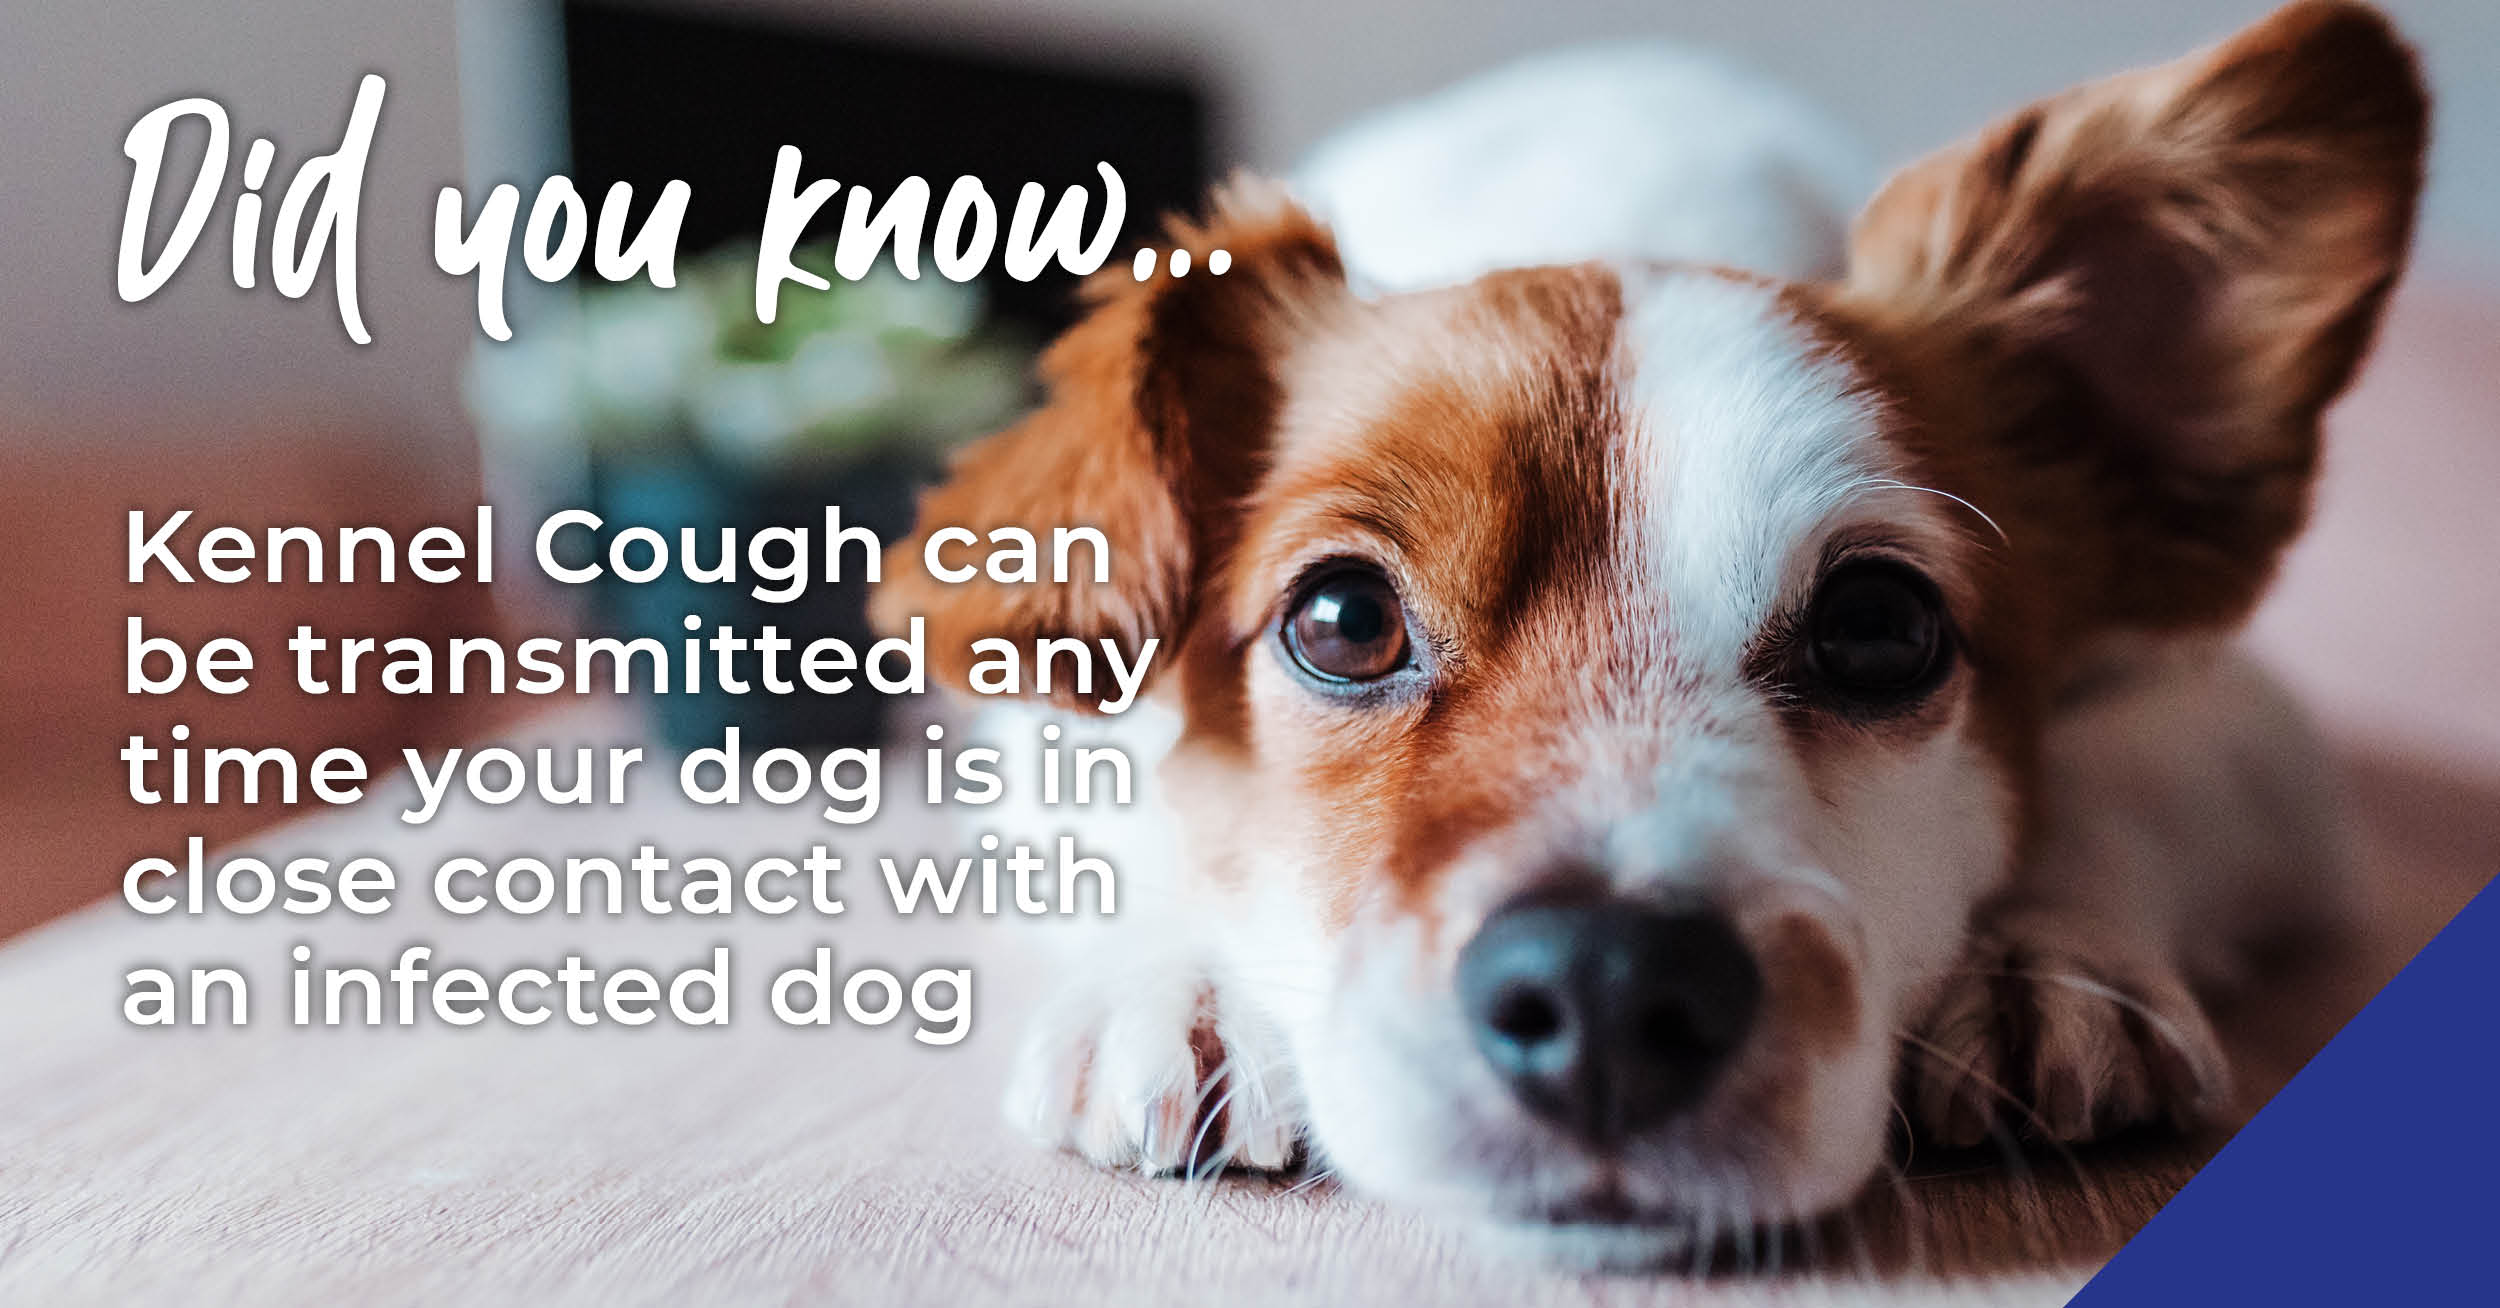 Protect your dog against Kennel Cough